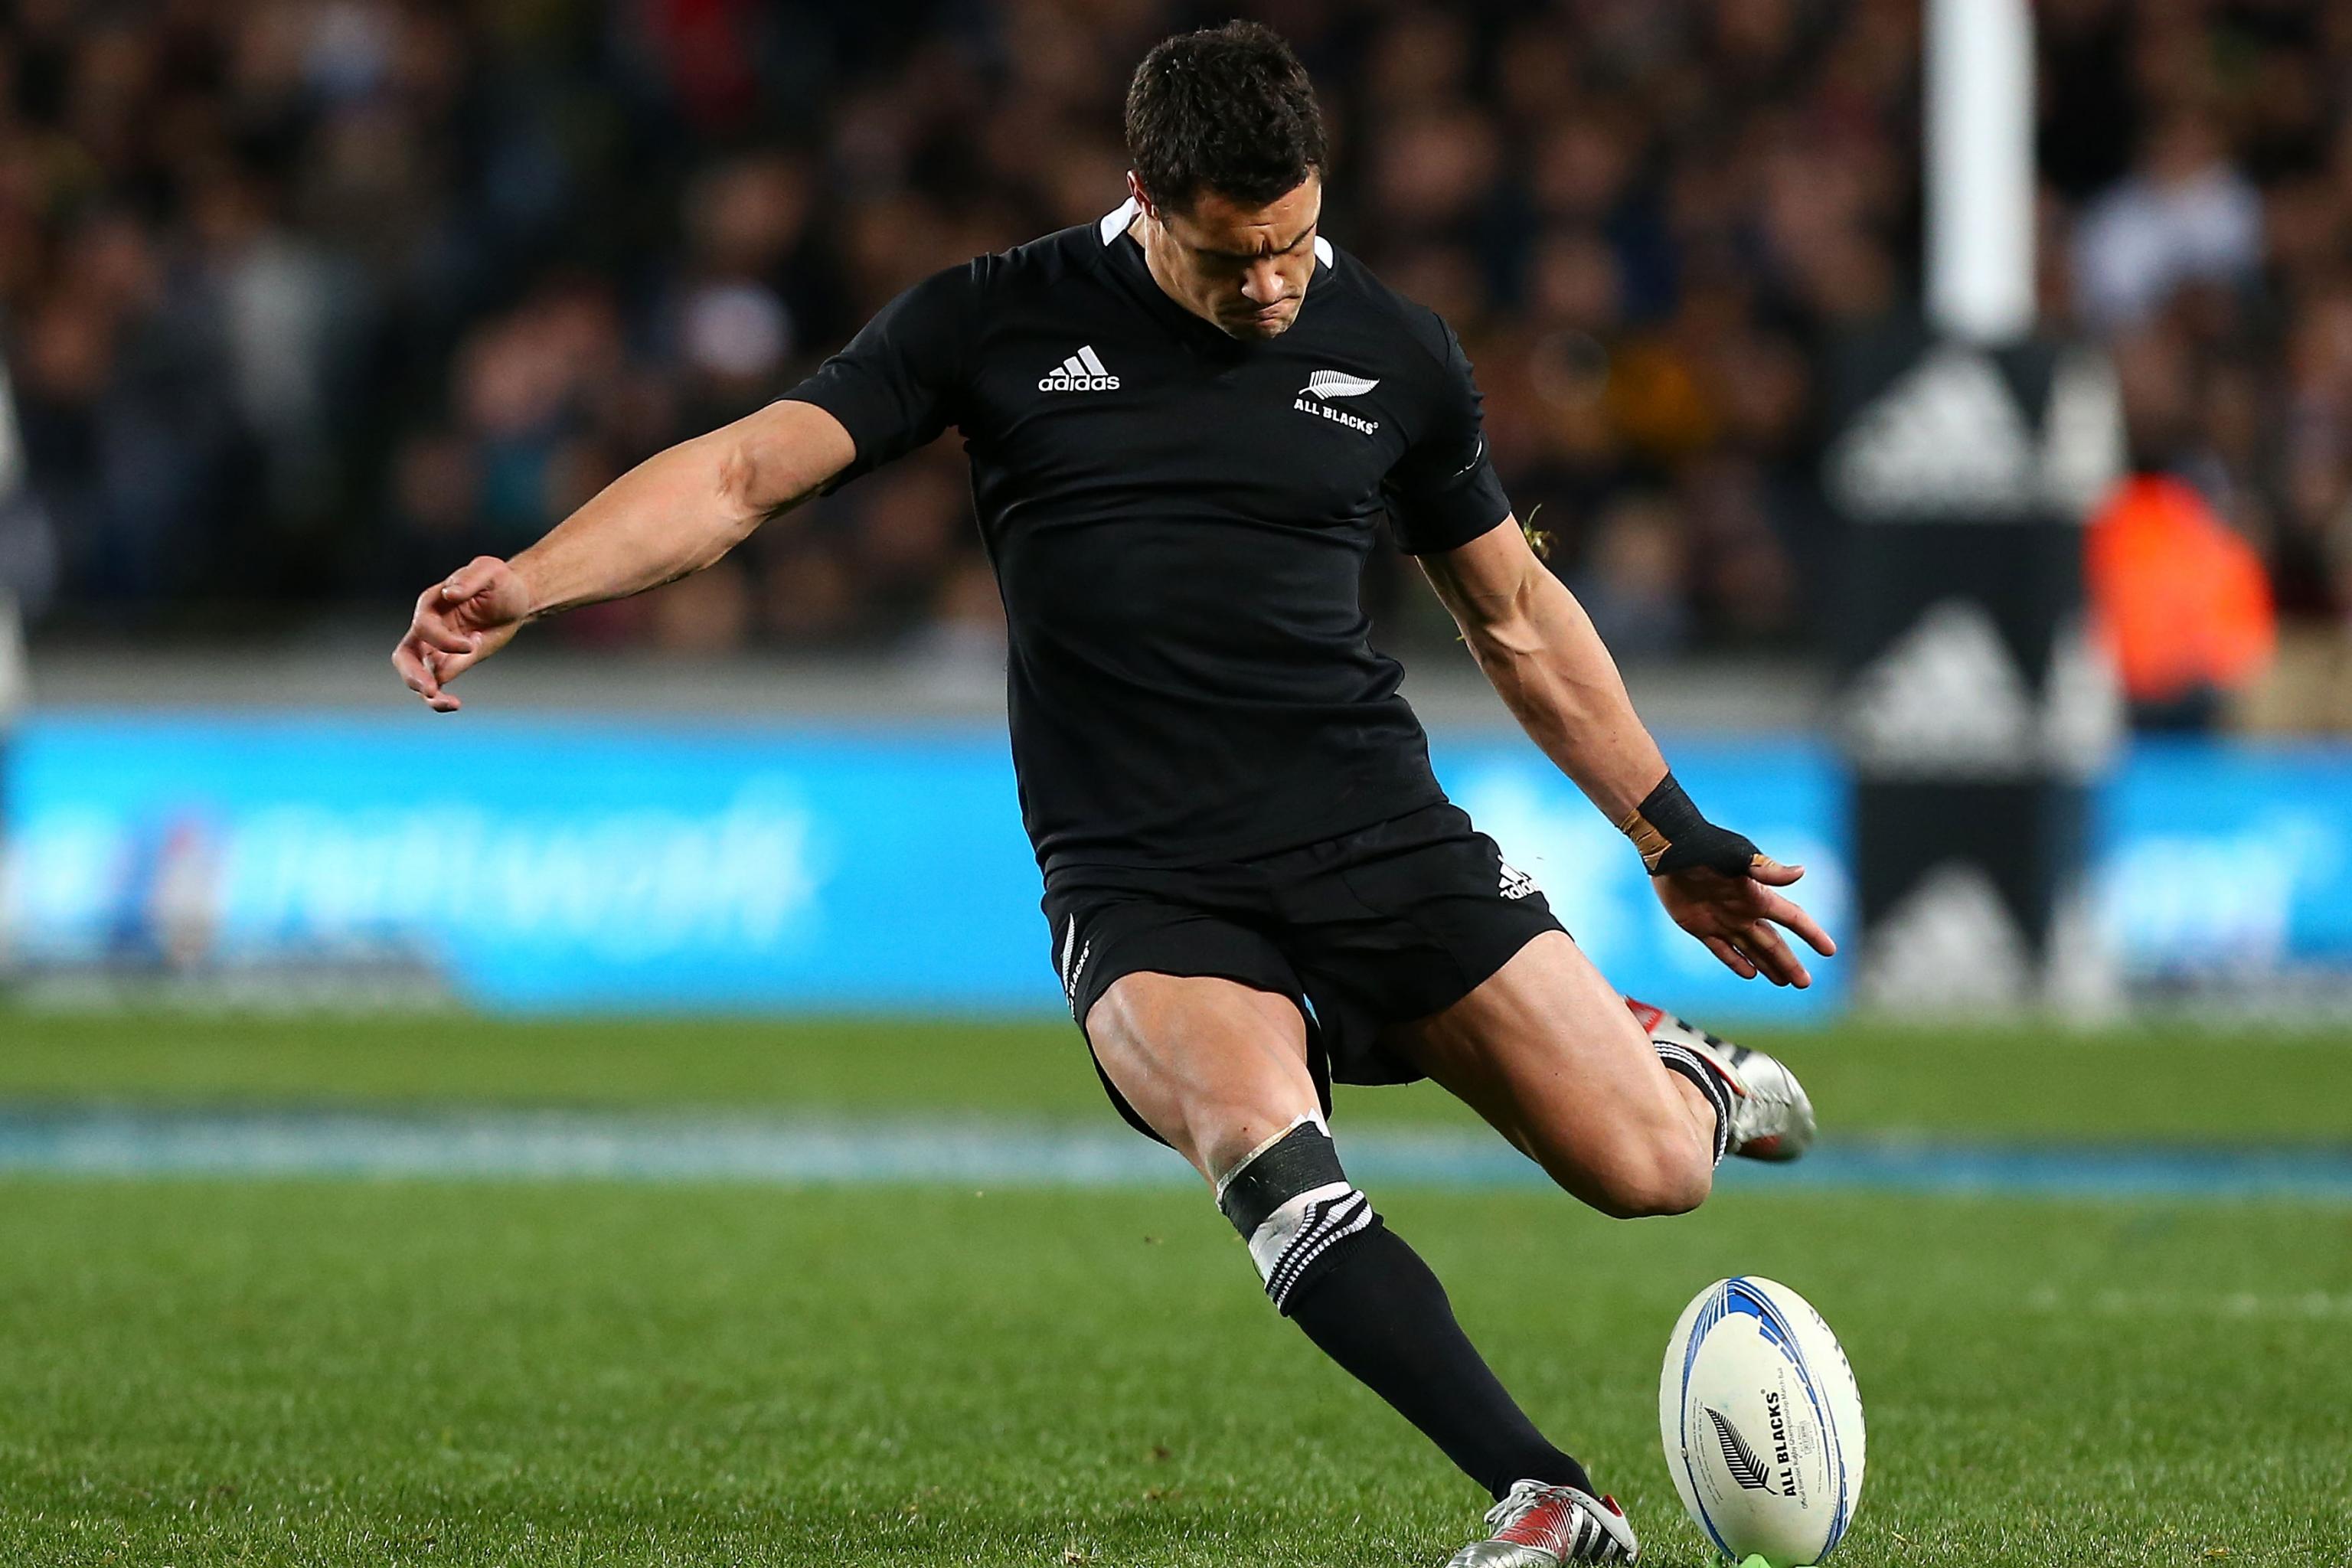 Has Dan Carter Played the Final Game of an Illustrious All Black